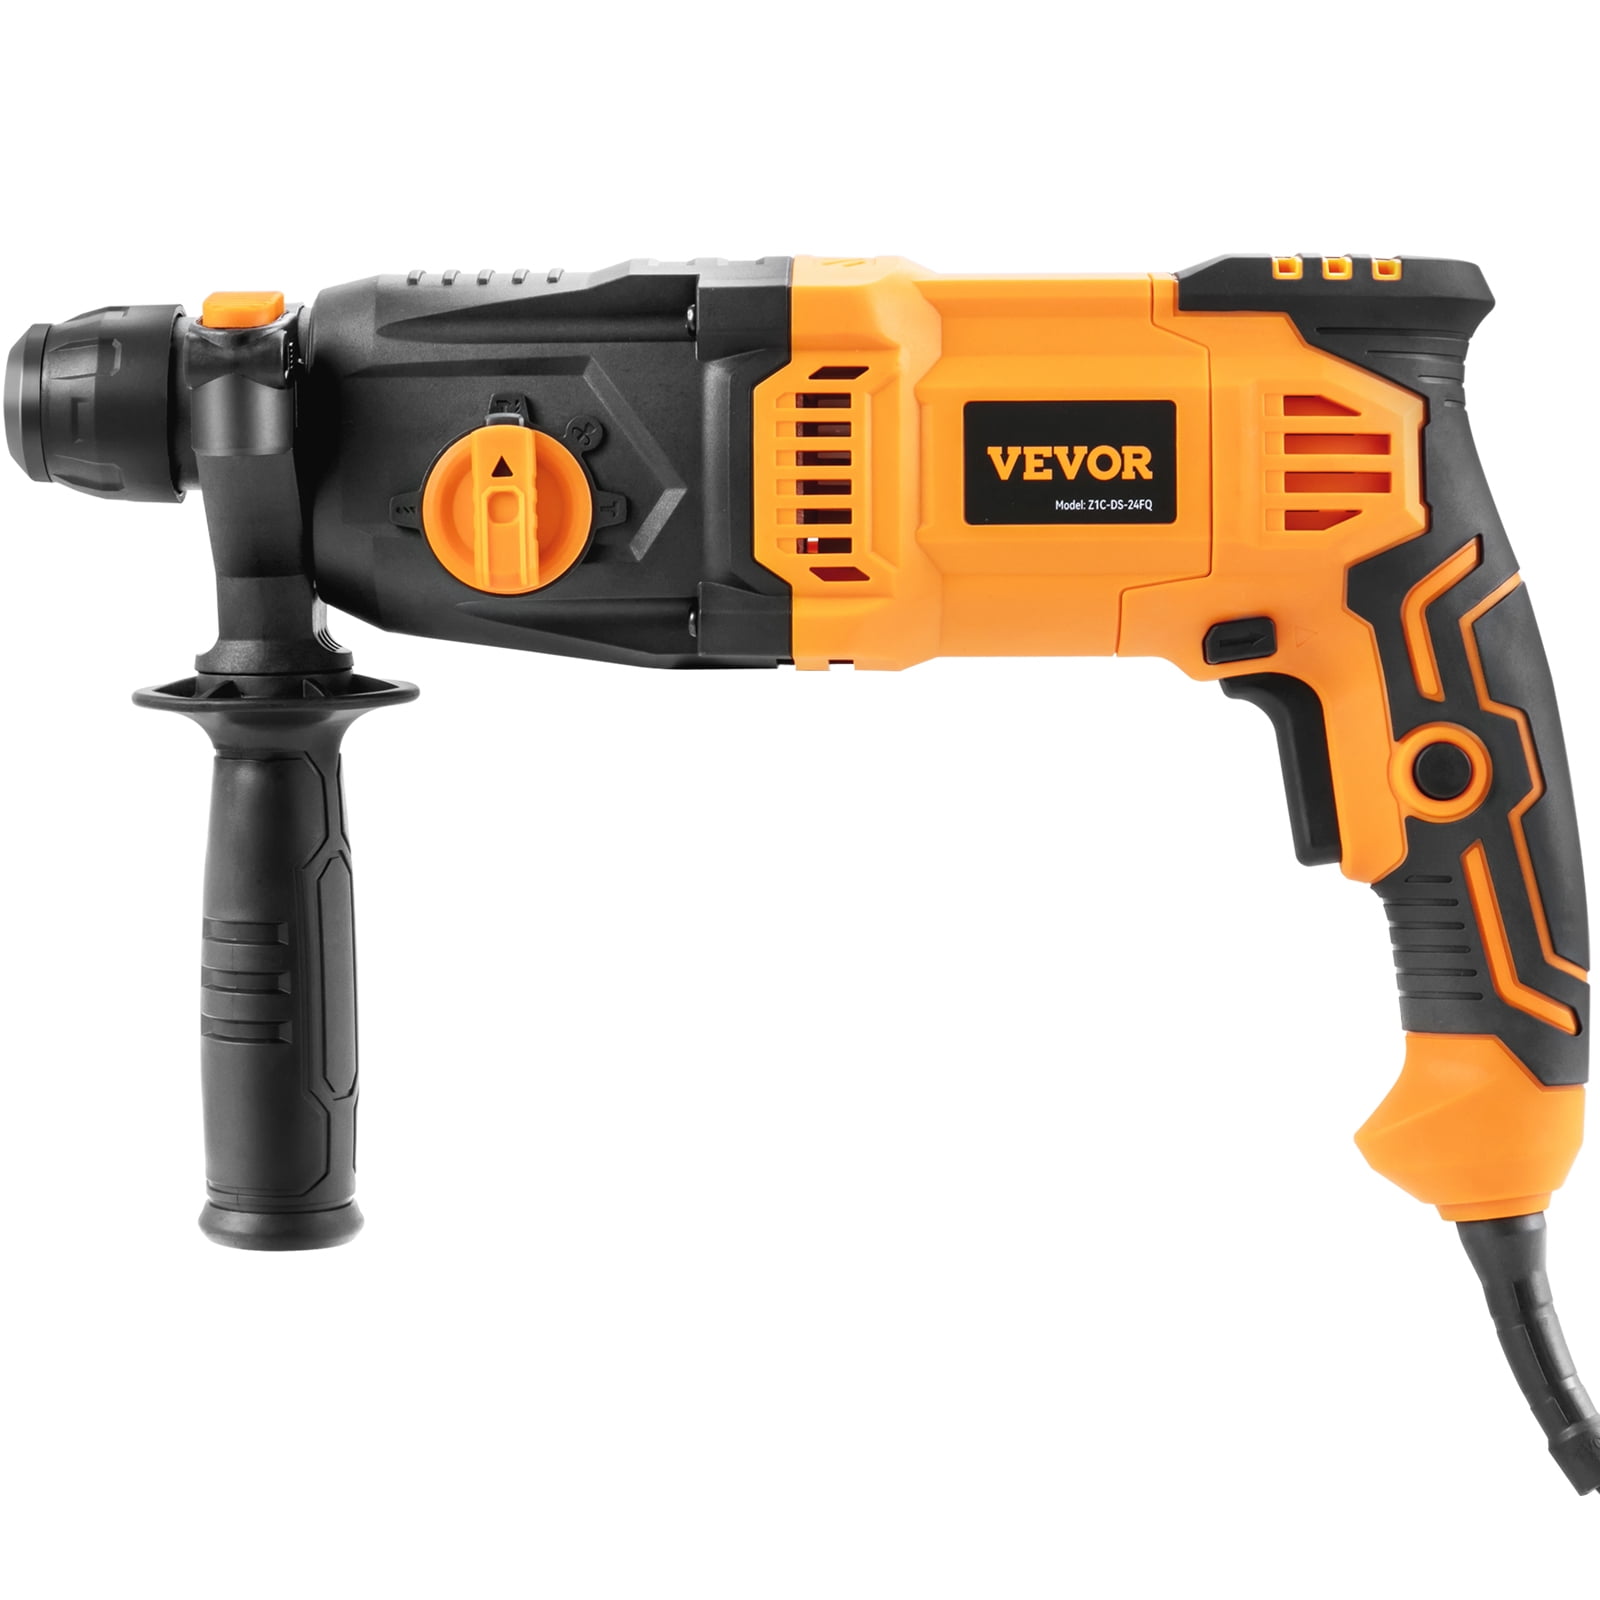 4 Function SDS Plus Rotary Hammer Drill, 1500W Corded Hammer Drill Power  Impact Drill Heavy Duty 6 Variable Speed 13 mm Key Control Chuck, with Case  : : DIY & Tools